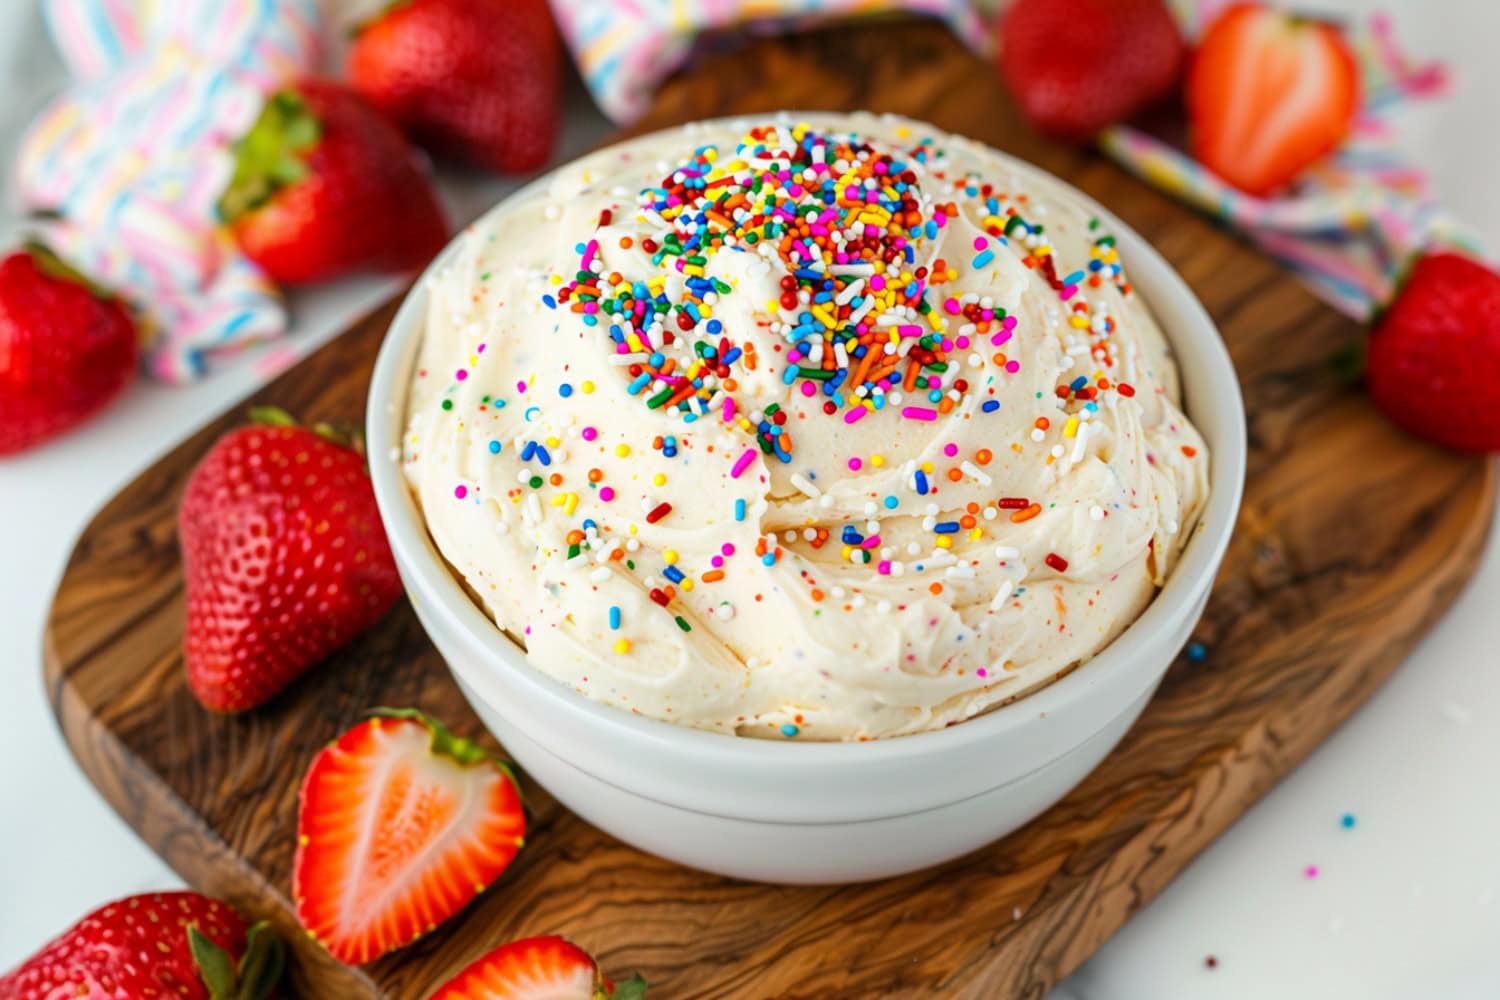 Fun and festive funfetti cake dip in a white bowl, served with fresh strawberries on the side